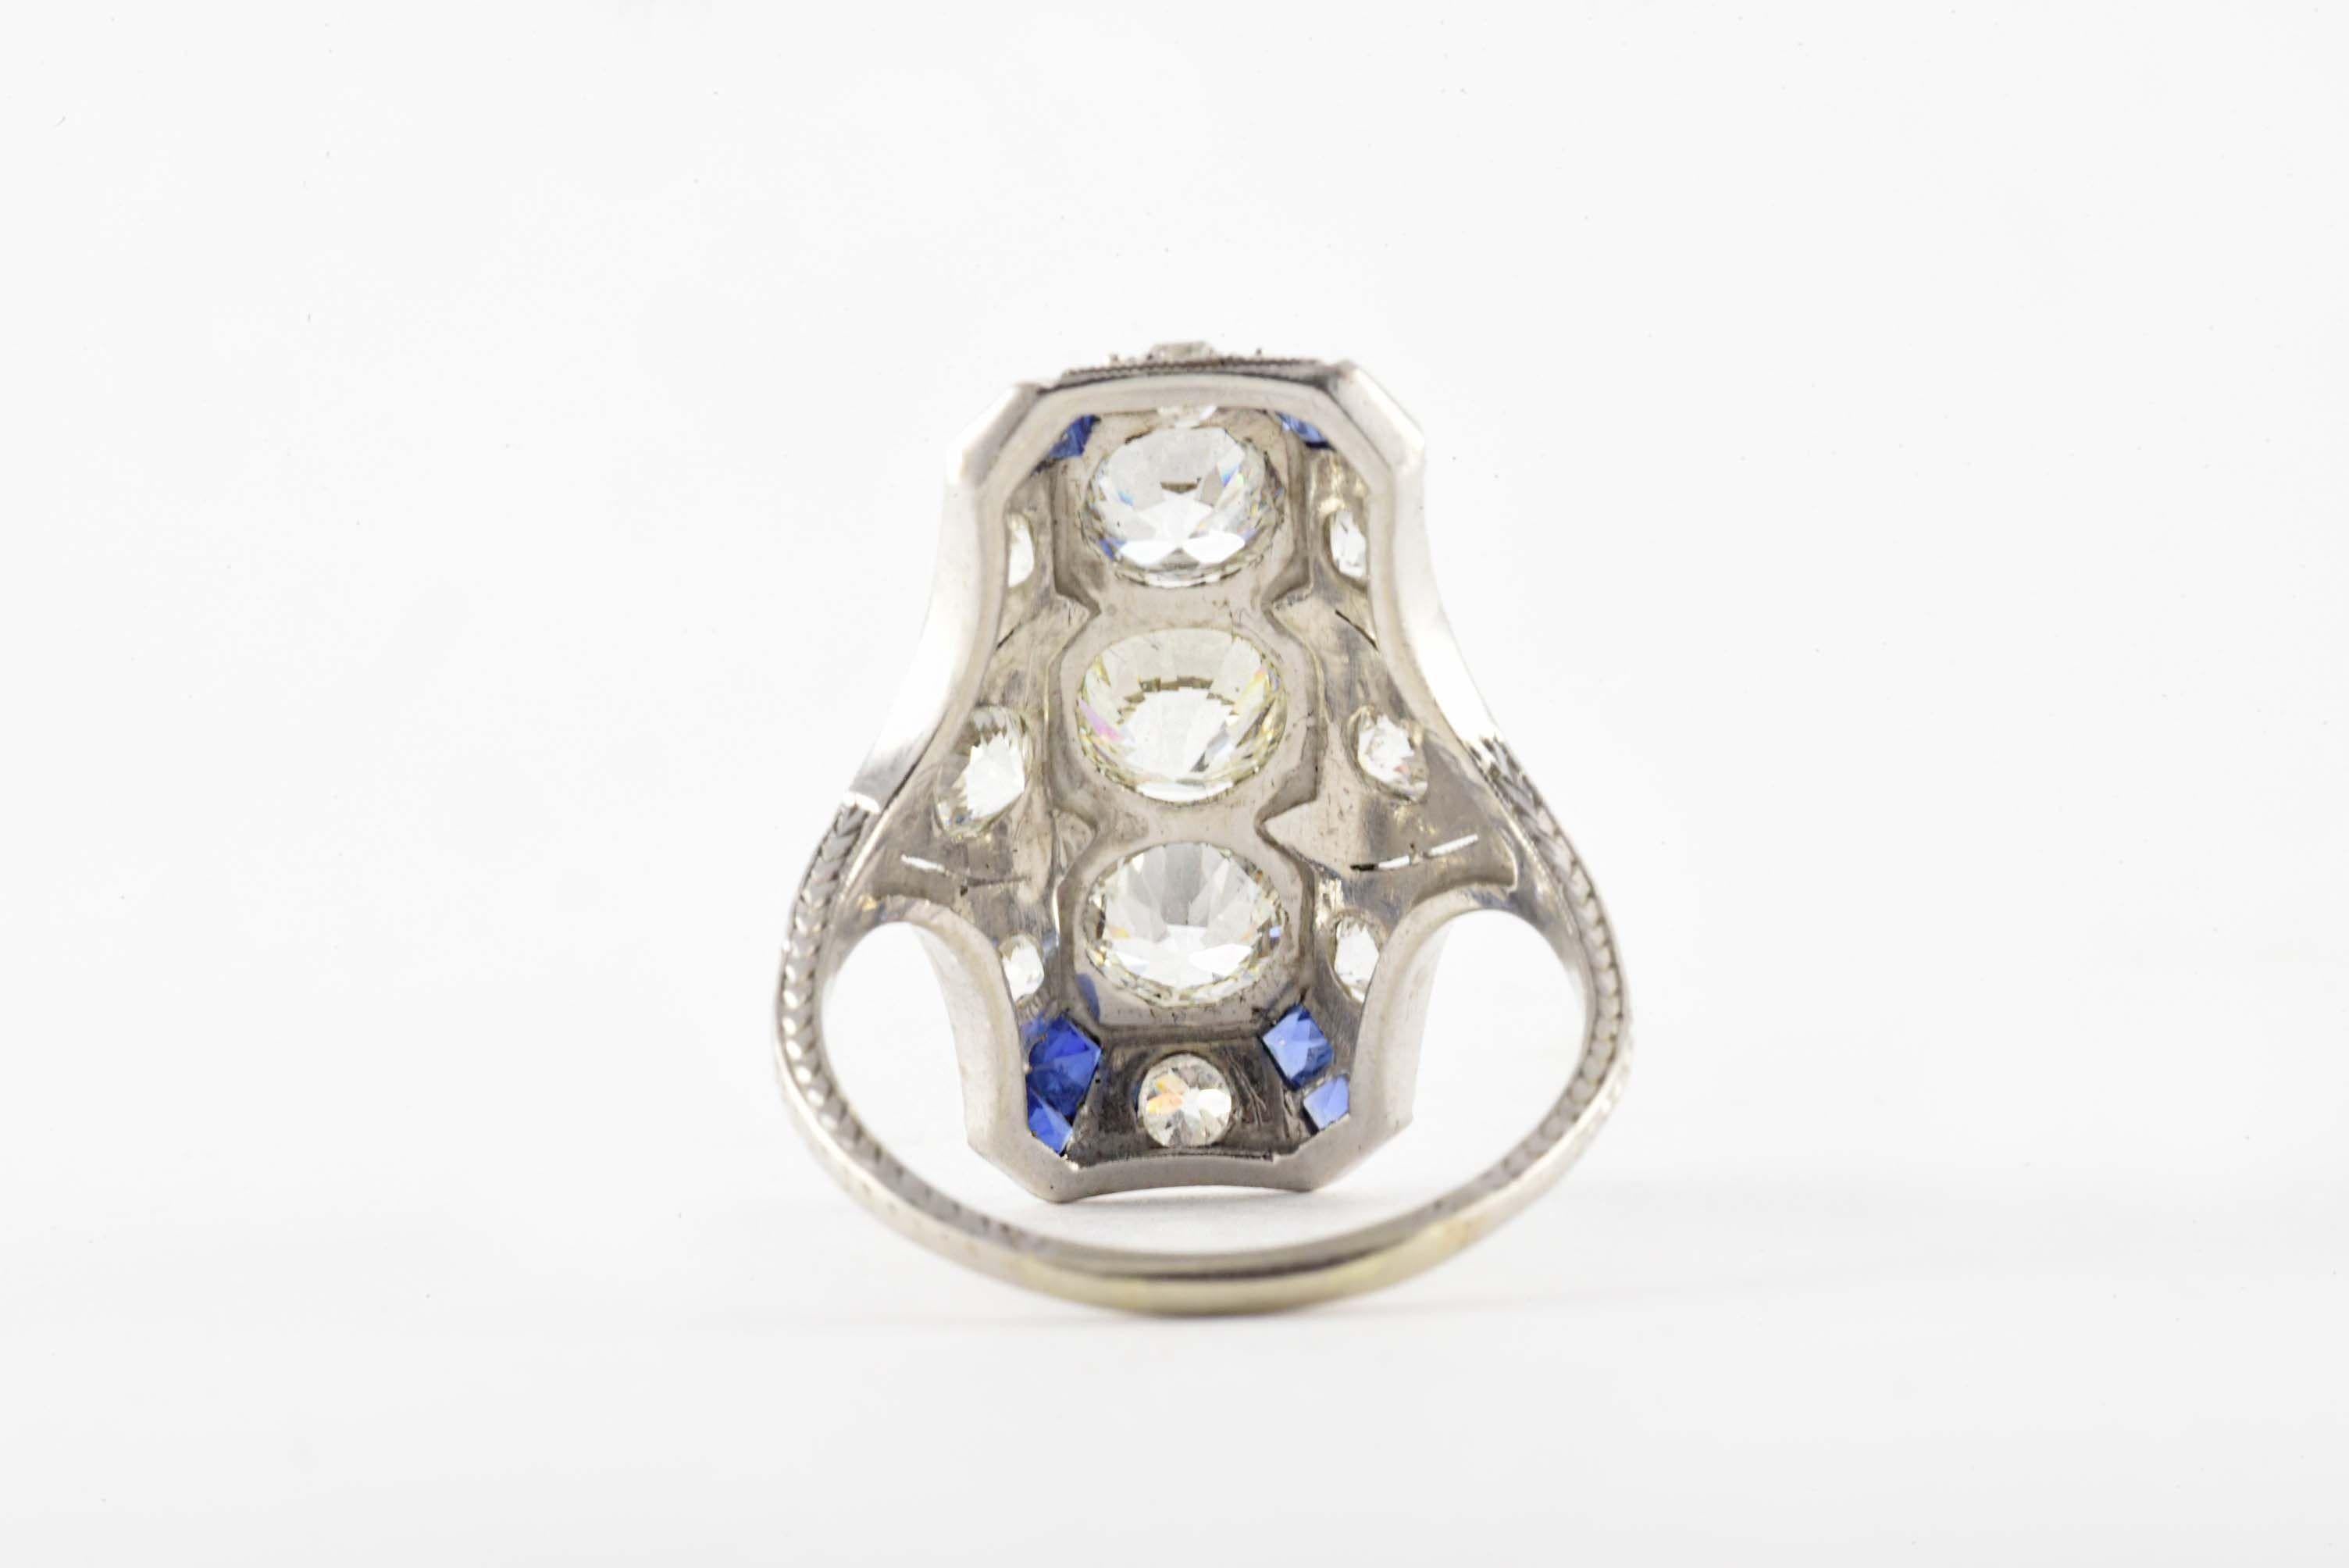 This glistening 14kt white gold and platinum ring is designed around a trio of Old European cut diamonds each measuring 0.65 carats, F-G color, VS clarity, accented with eight smaller Old European cut diamonds and eight calibrated blue square-shaped